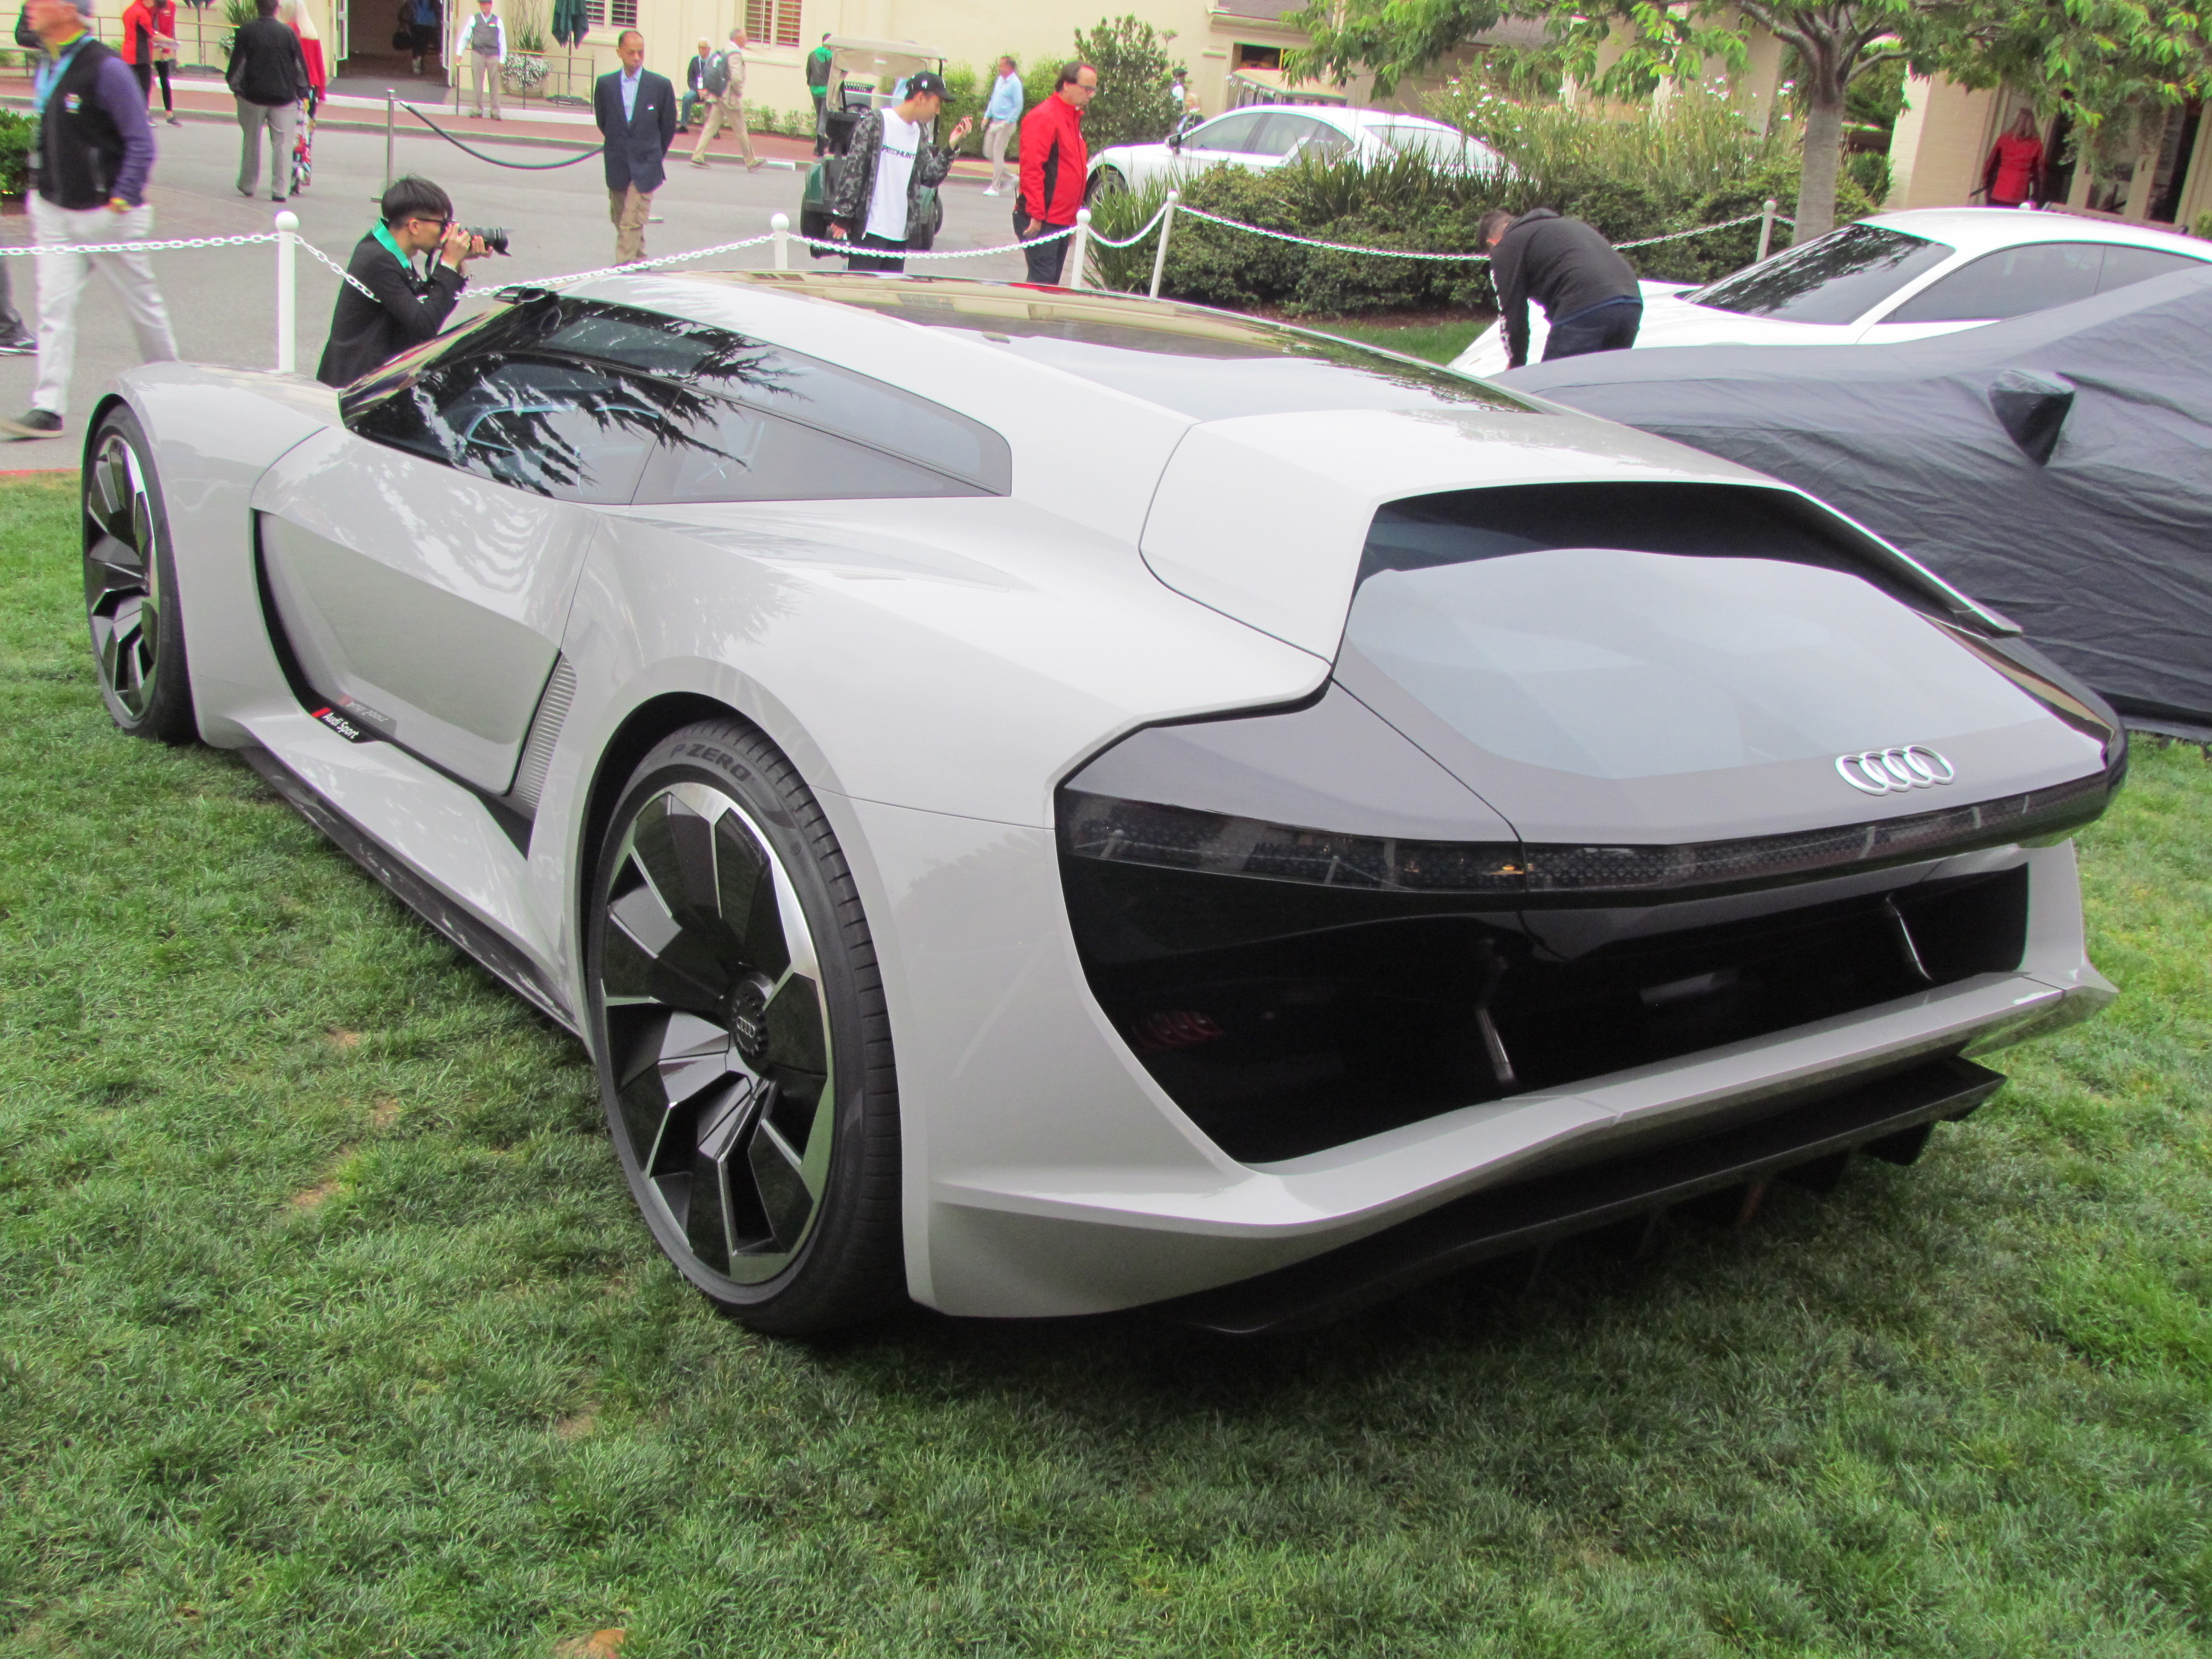 Pebble Beach, What a concept: Automakers showcase their visions for the future at Pebble Beach, ClassicCars.com Journal